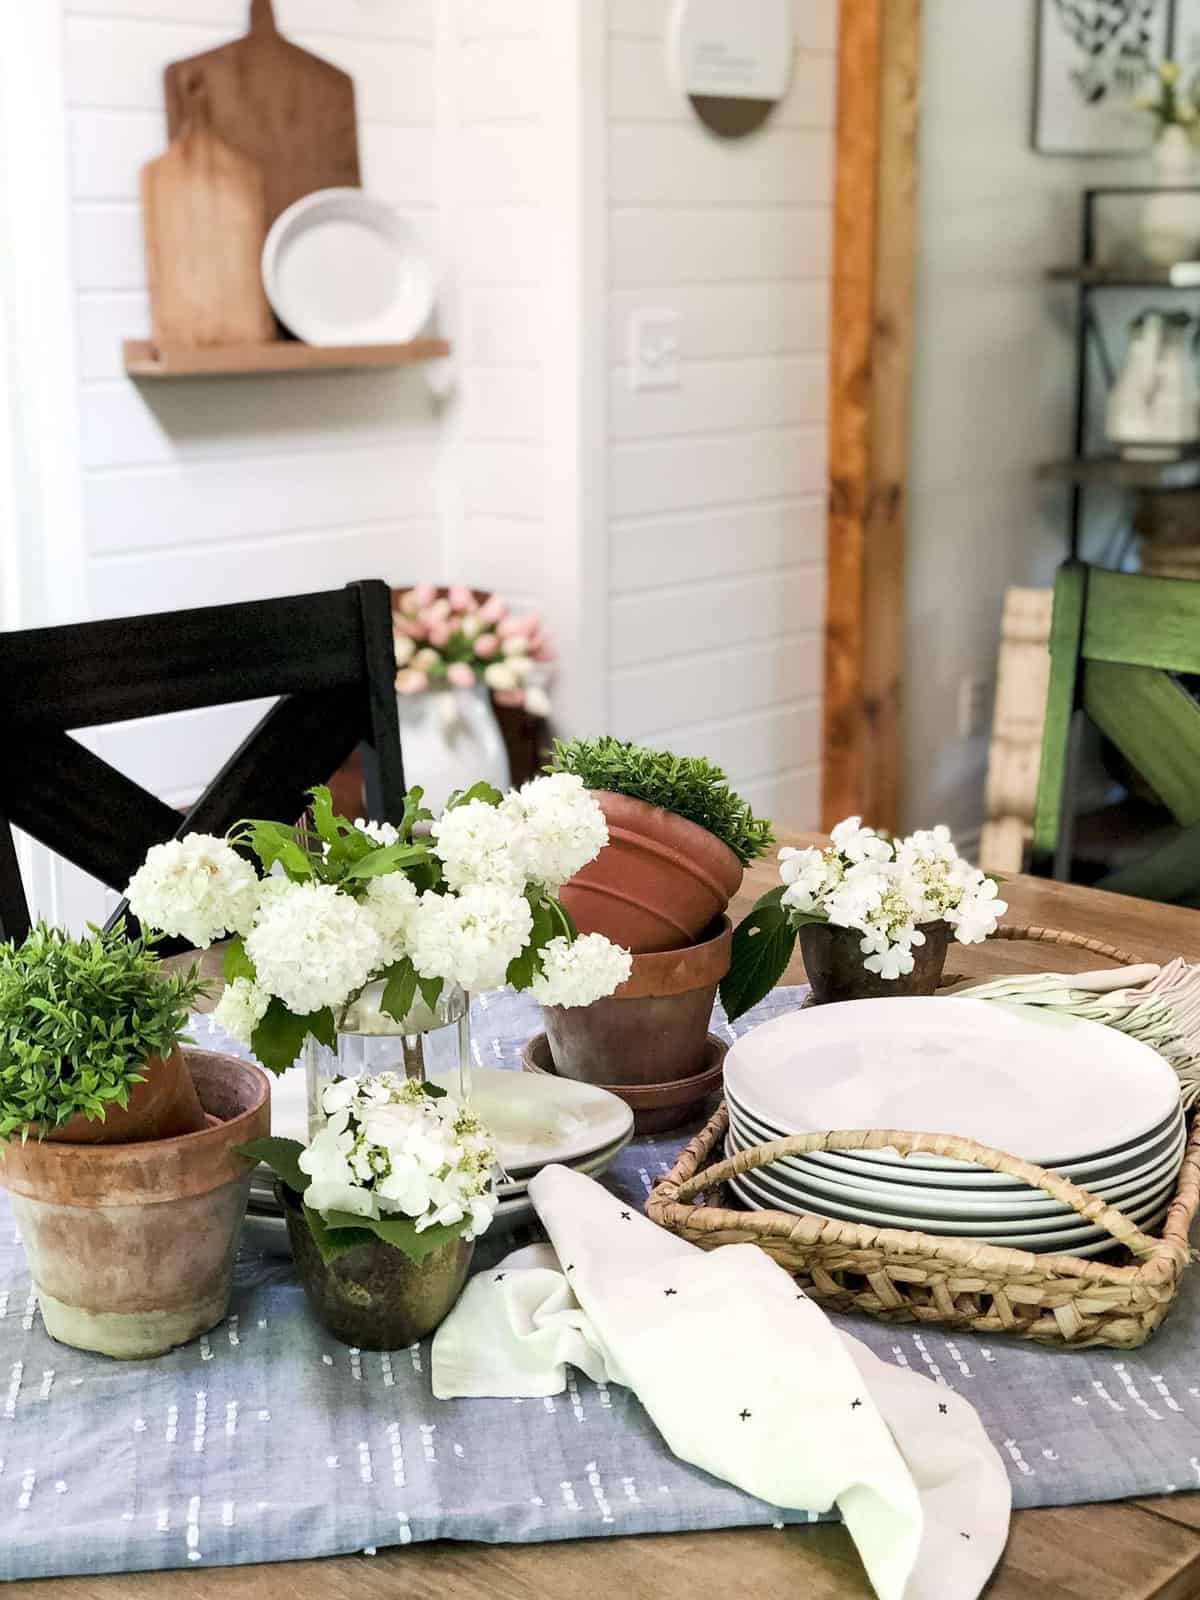 Are you looking for a themed summer tablescape idea? Here is a simple garden party summer tablescape that is effortless and beautiful. #fromhousetohaven #summerdecor #summertablescape #gardenparty